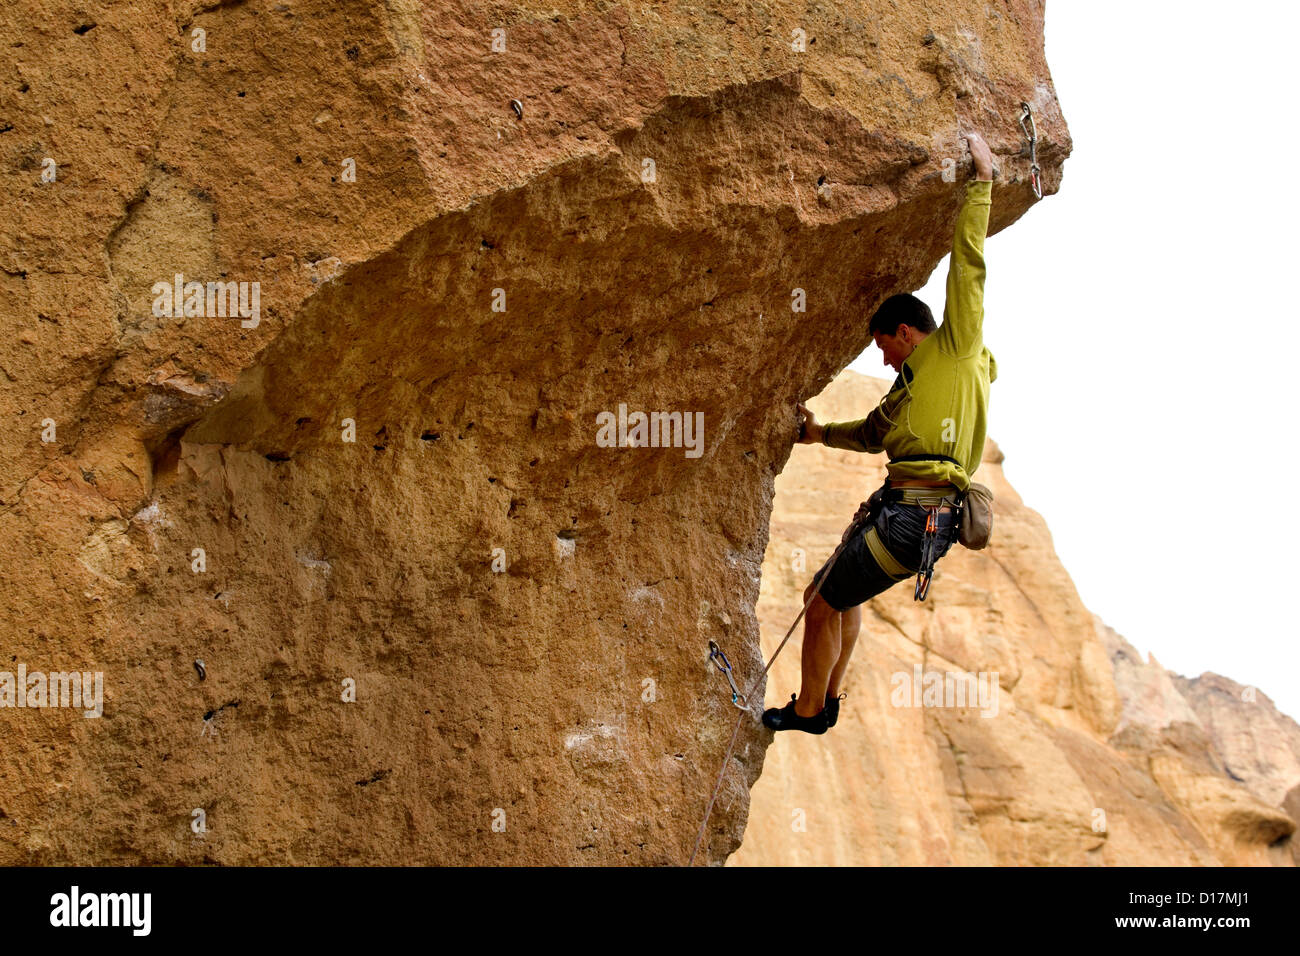 OR00598-00....OREGON - Rock climber Ulli Viertler ascending an overhang on the Chain Reaction route at Smith Rocks State Park. Stock Photo